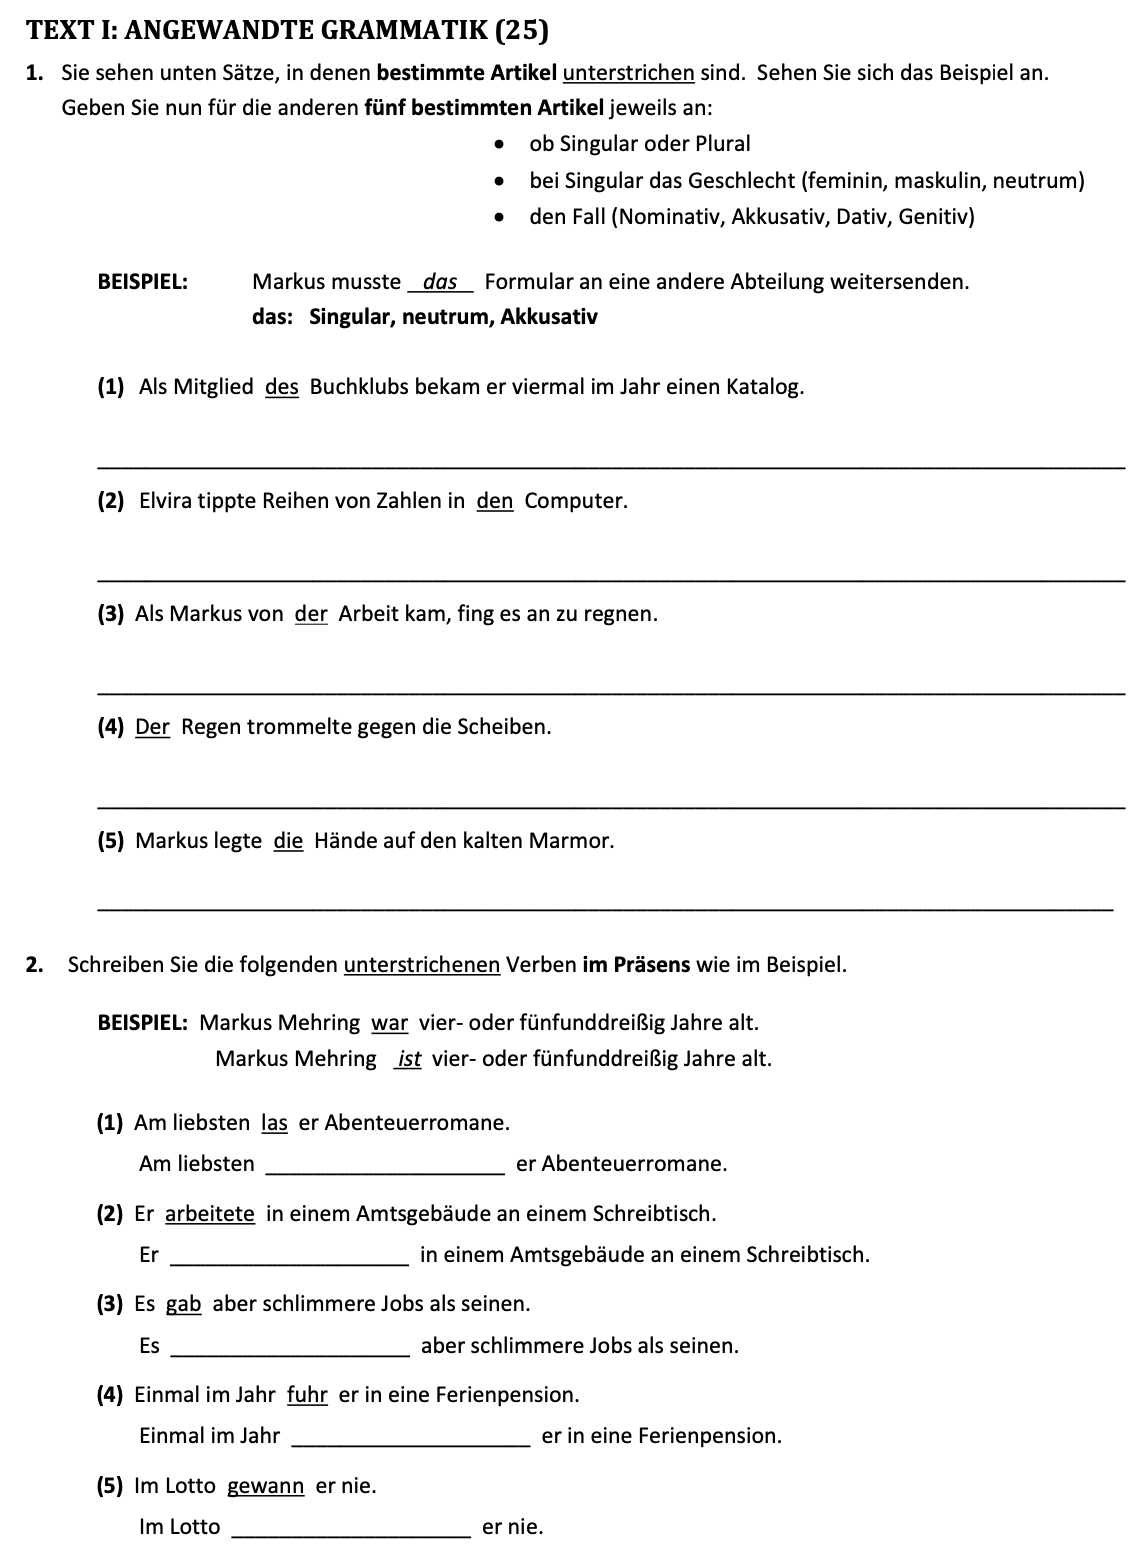 an image of the question 2017 Text I Angewandte Grammatik which is about the topic grammatik and the subject is Leaving Certificate german